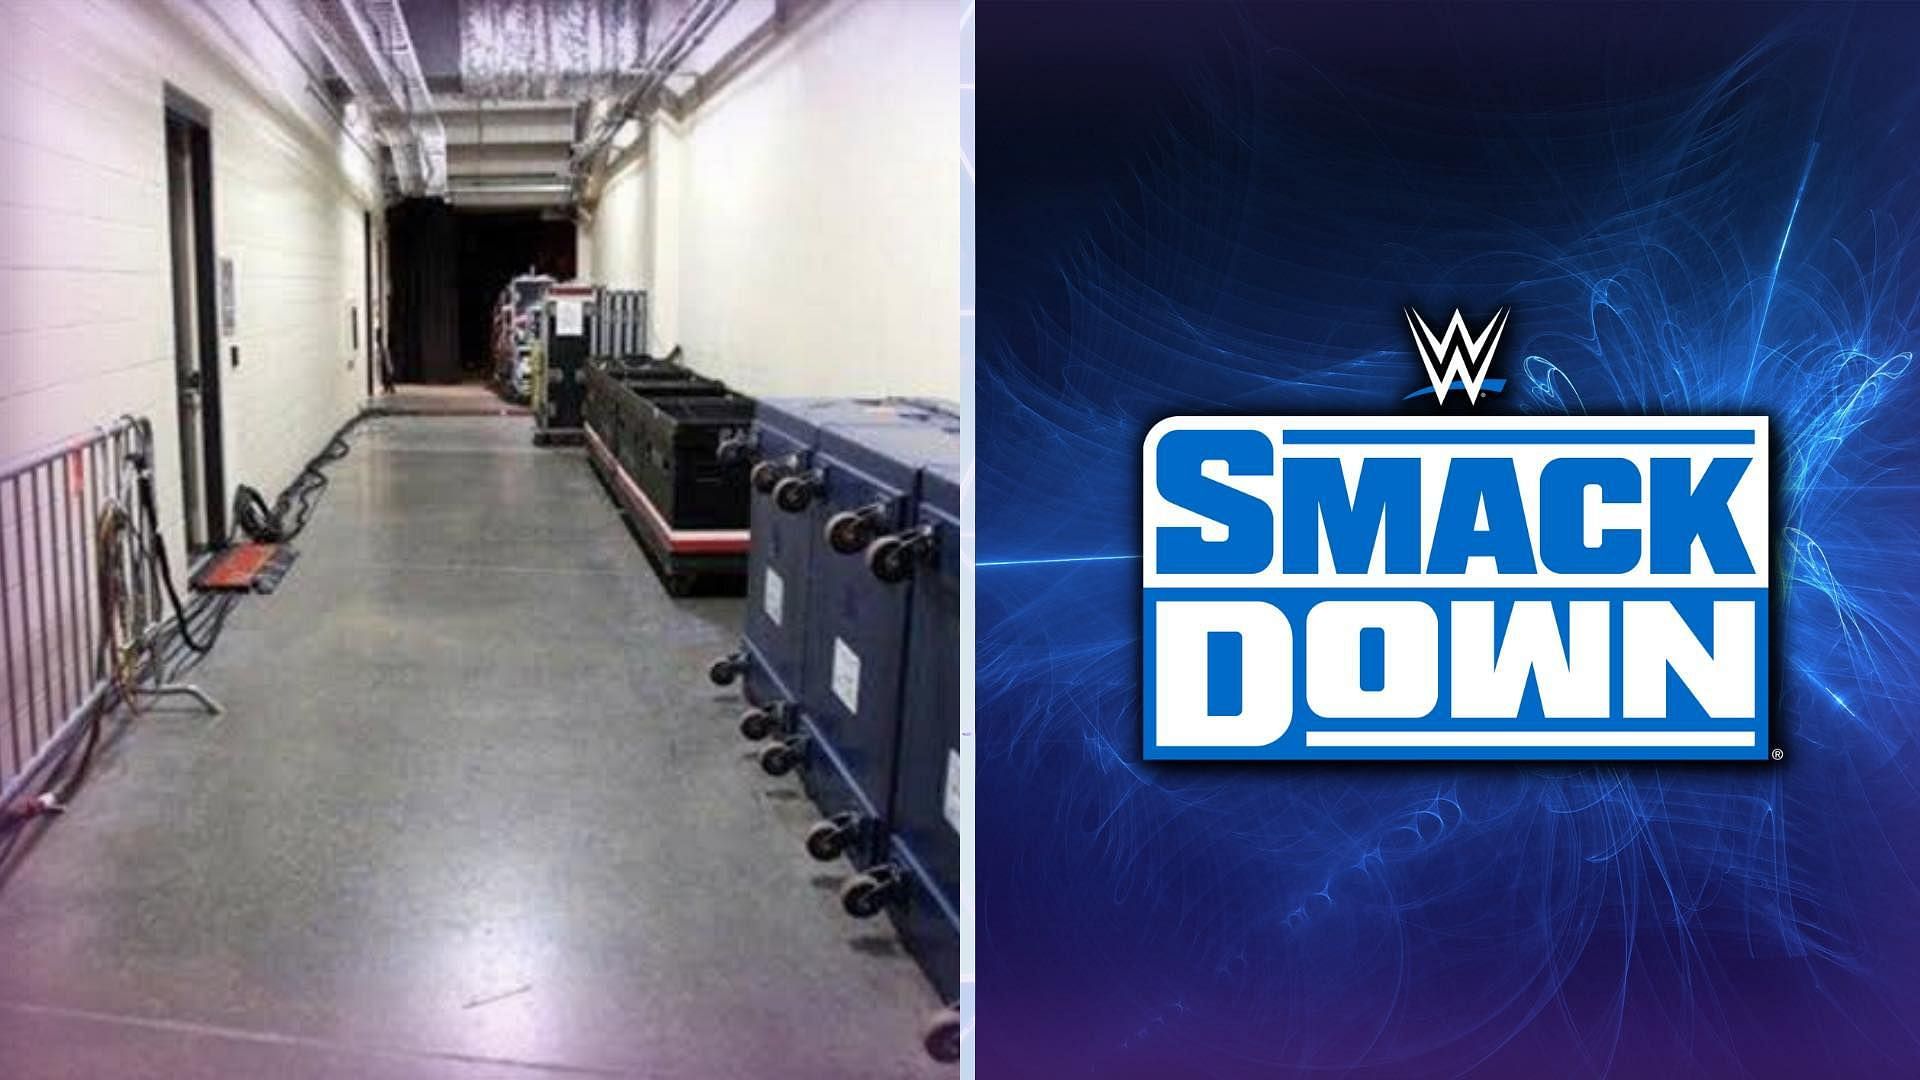 SmackDown saw a debut of a WWE star from developmental brand.